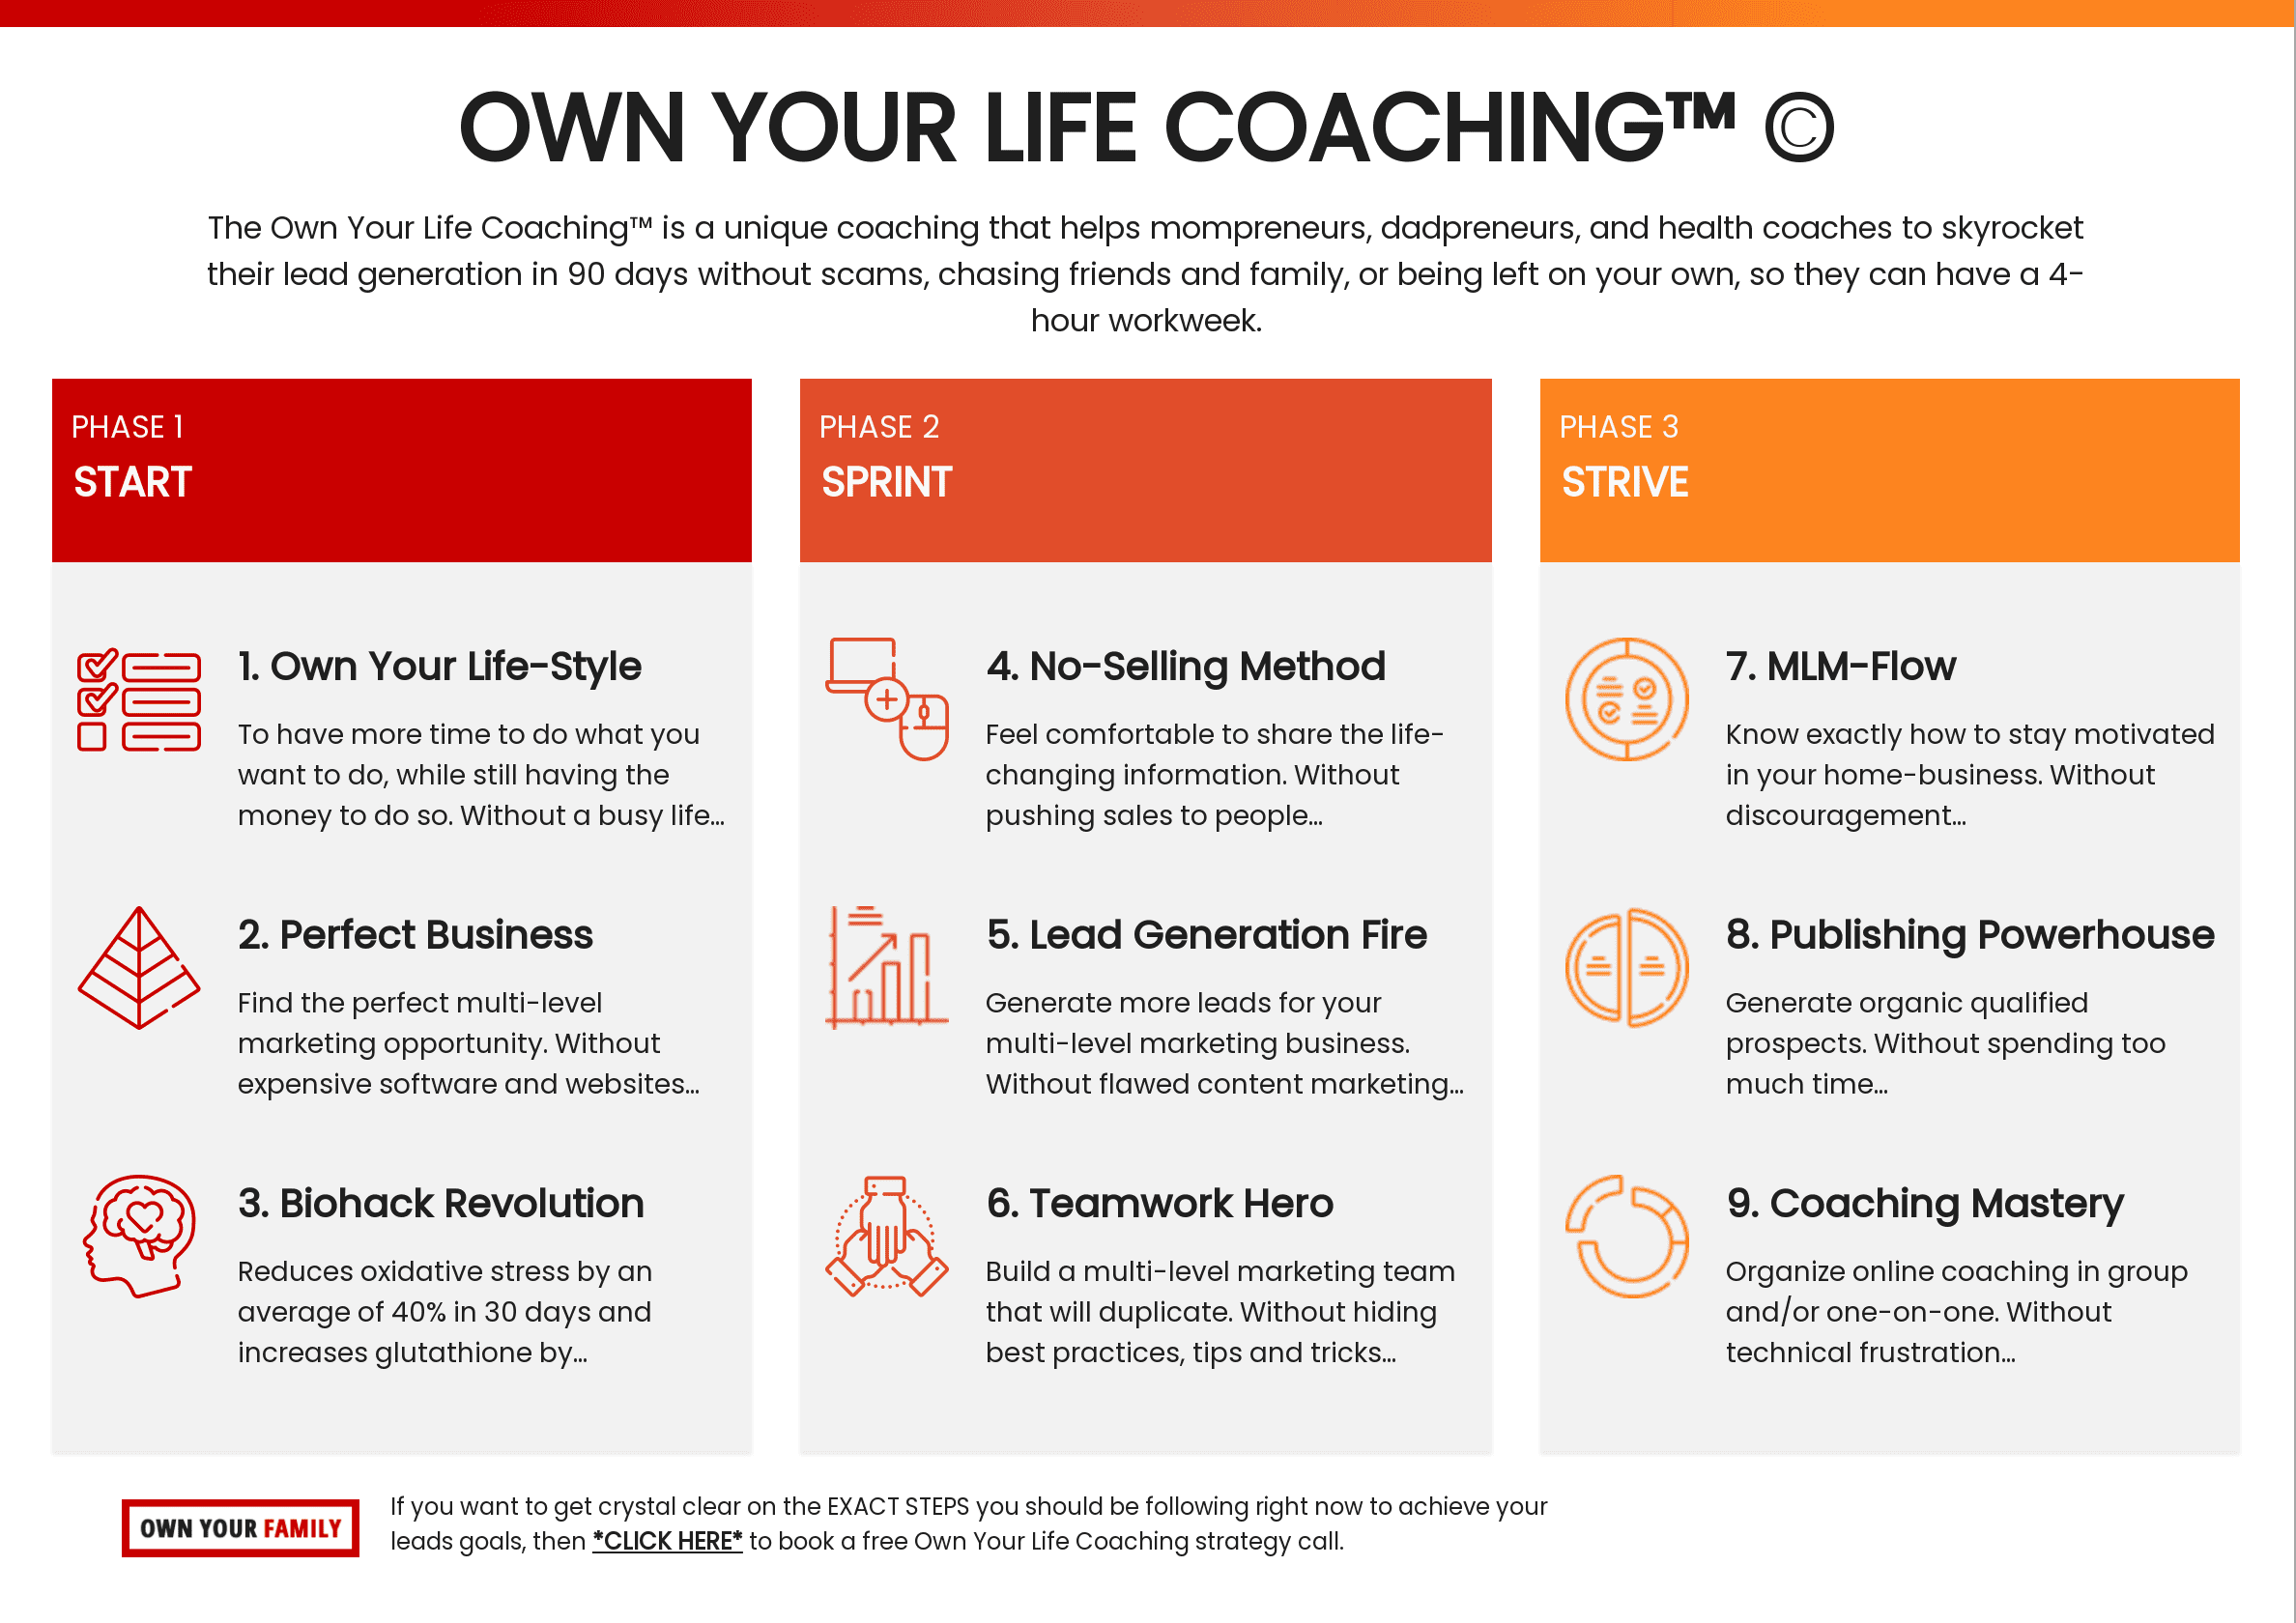 Own Your Life Coaching product roadmap